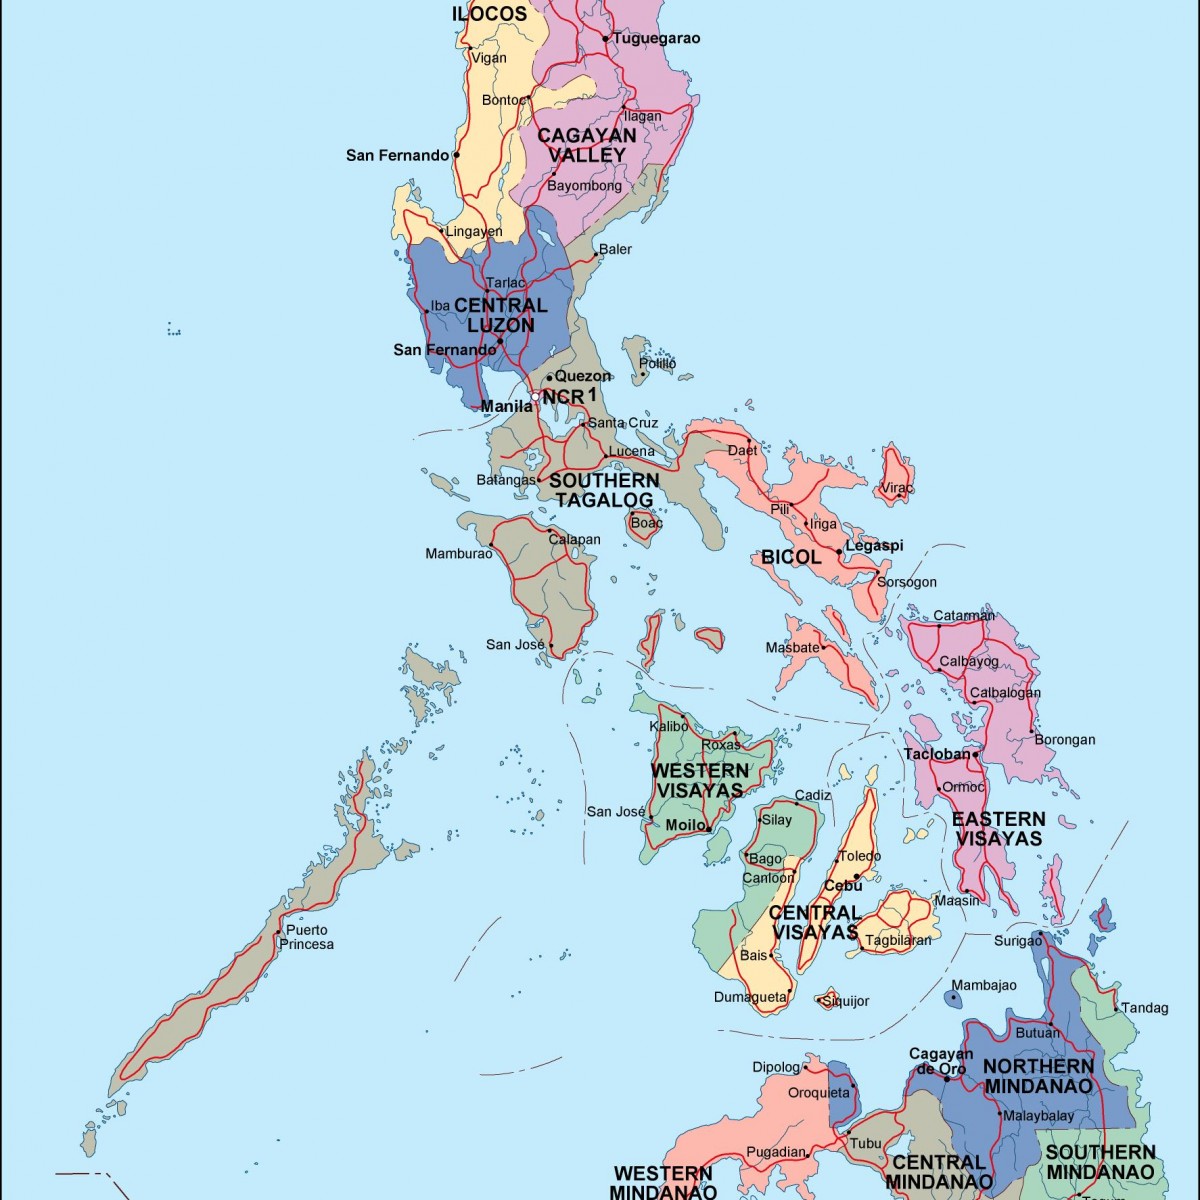 Philippines Political Map Eps Illustrator Map Vector World Maps